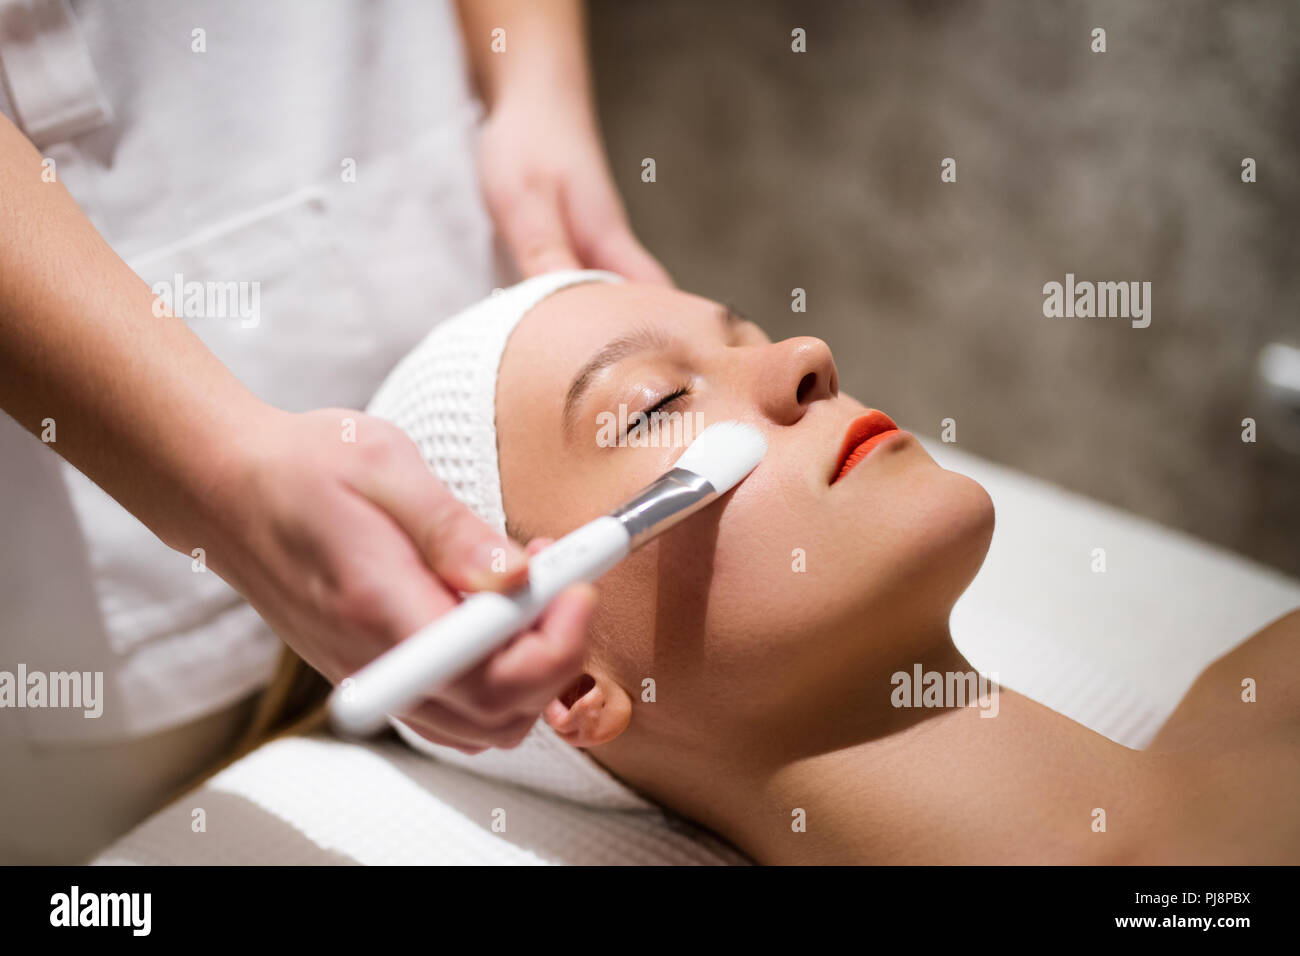 Cosmetic and massage treatment at wellbeing saloon Stock Photo